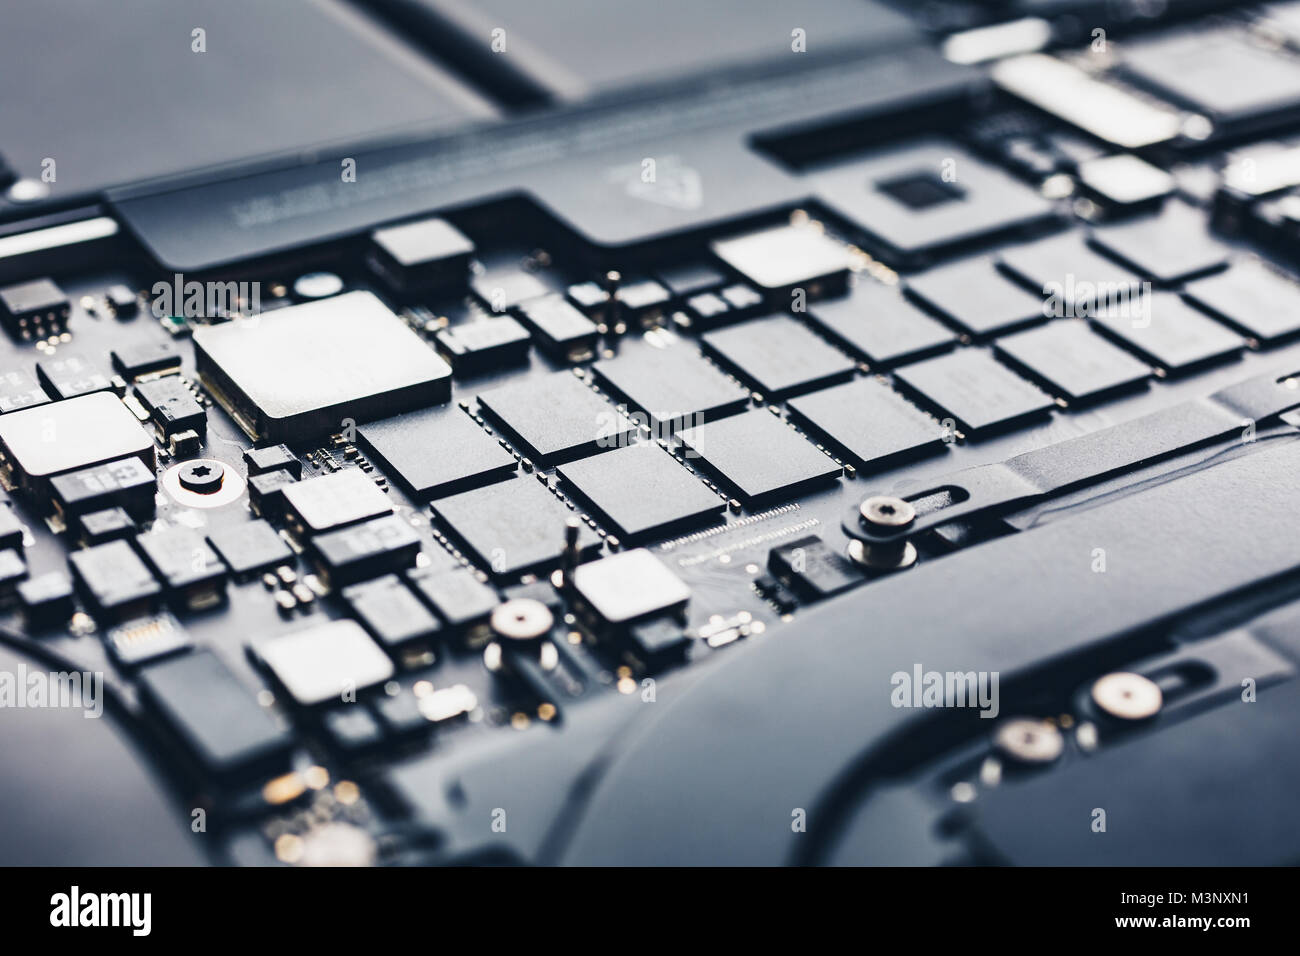 Motherboard of modern laptop Stock Photo